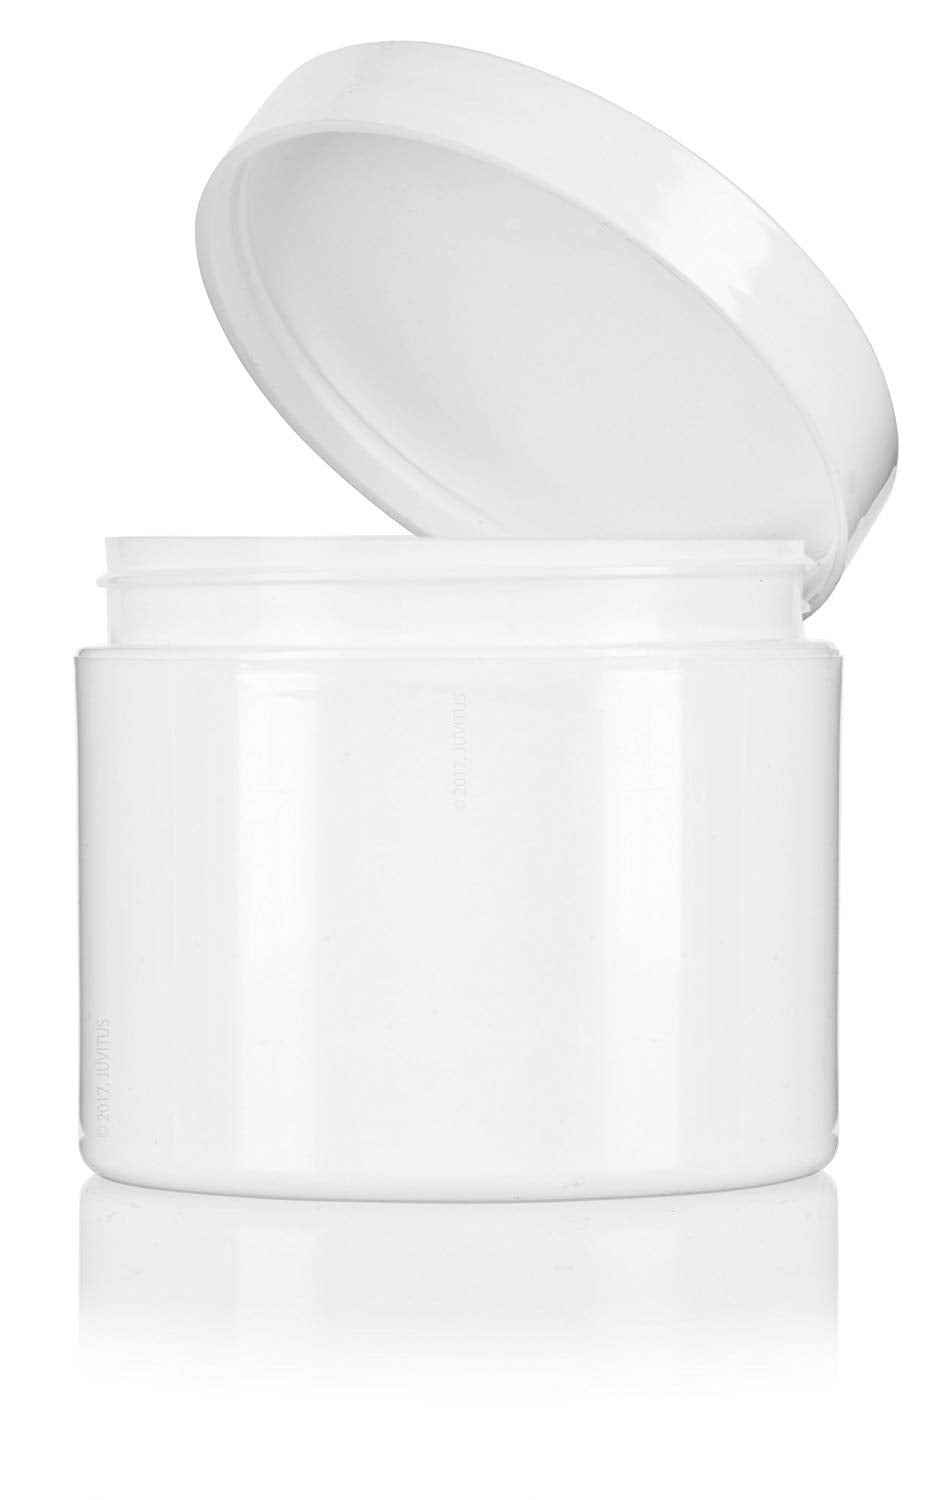 Plastic Double Wall Jar In White With White Foam Lined Lid 4 Oz 120 Ml